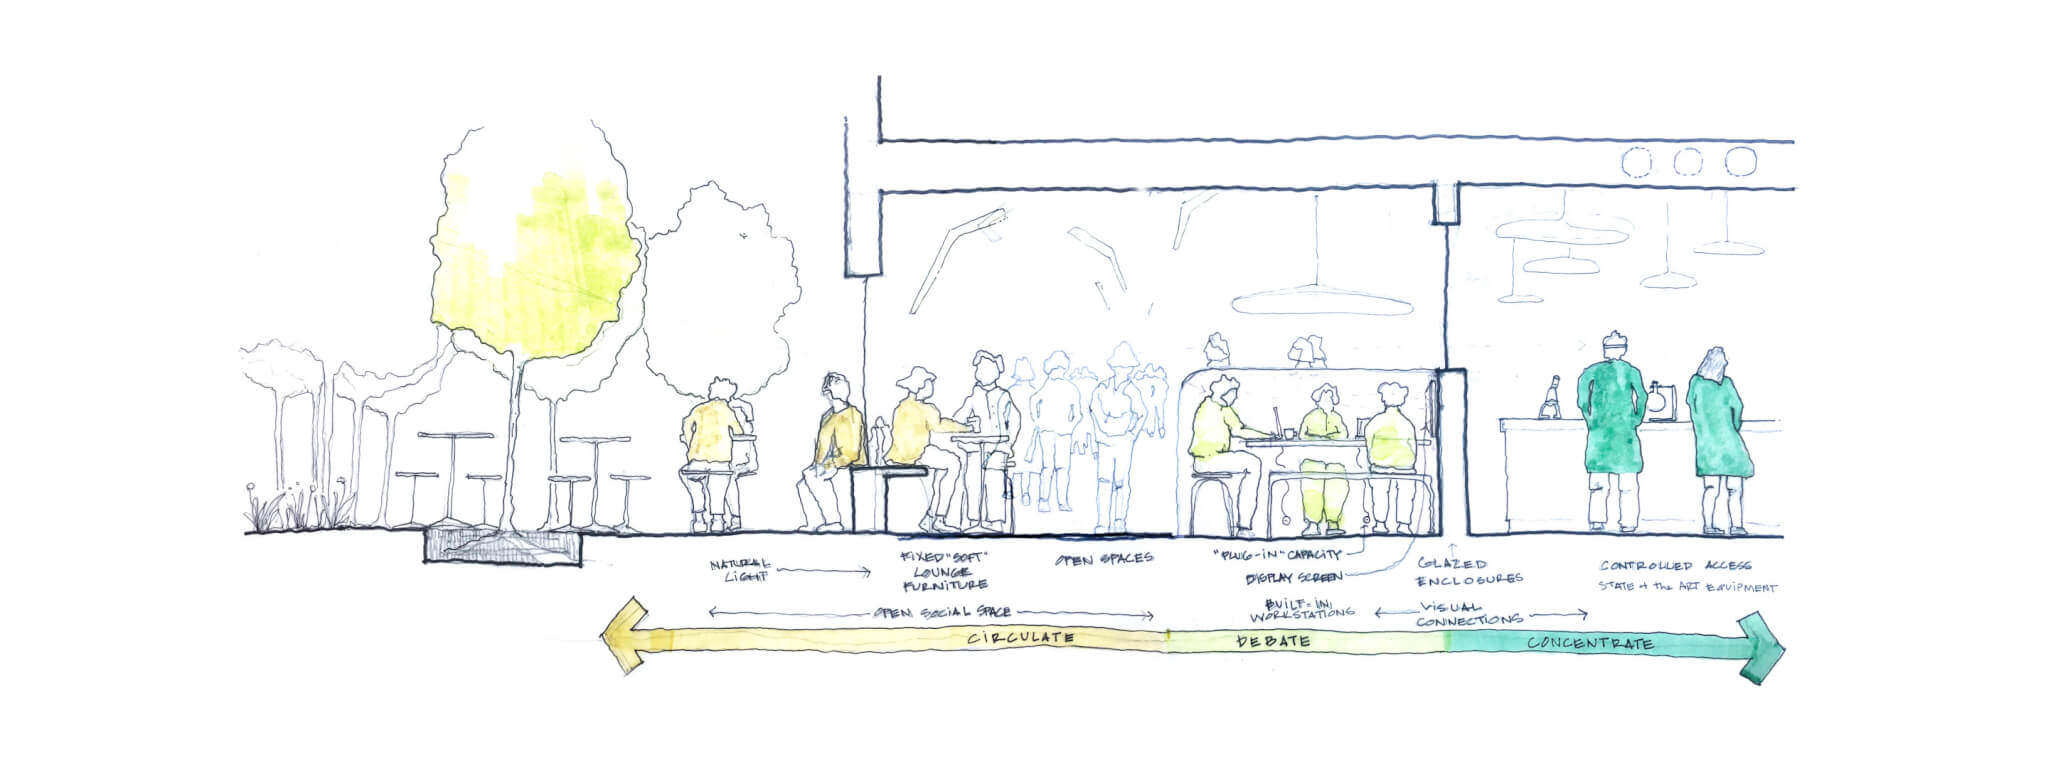 concept design drawing for academic spaces